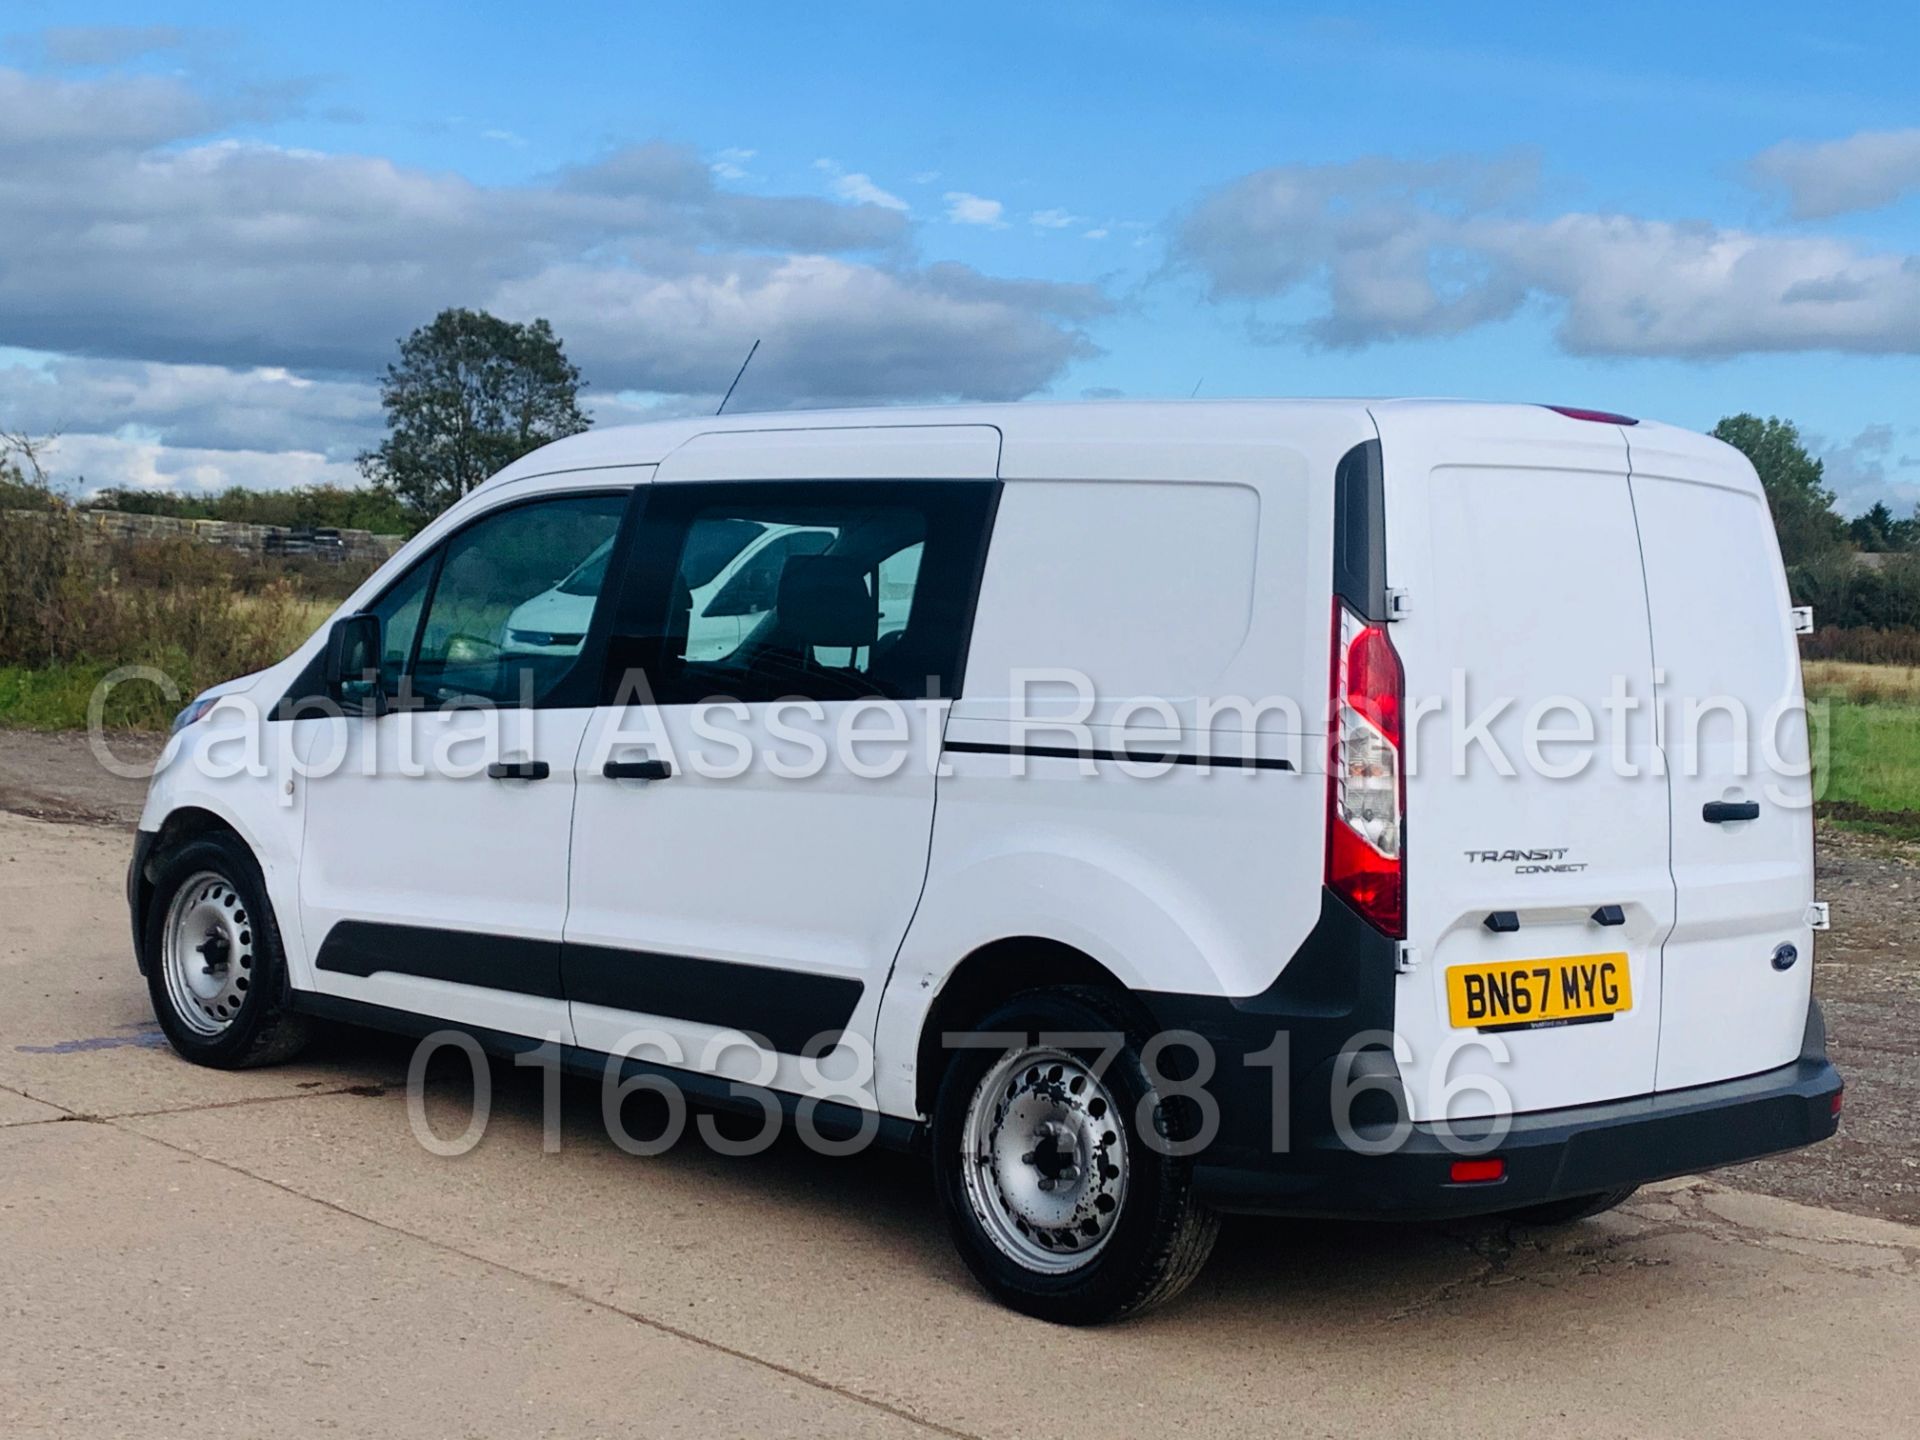 (On Sale) FORD TRANSIT CONNECT *LWB - 5 SEATER CREW VAN* (67 REG - EURO 6) 1.5 TDCI *A/C* (1 OWNER) - Image 10 of 40